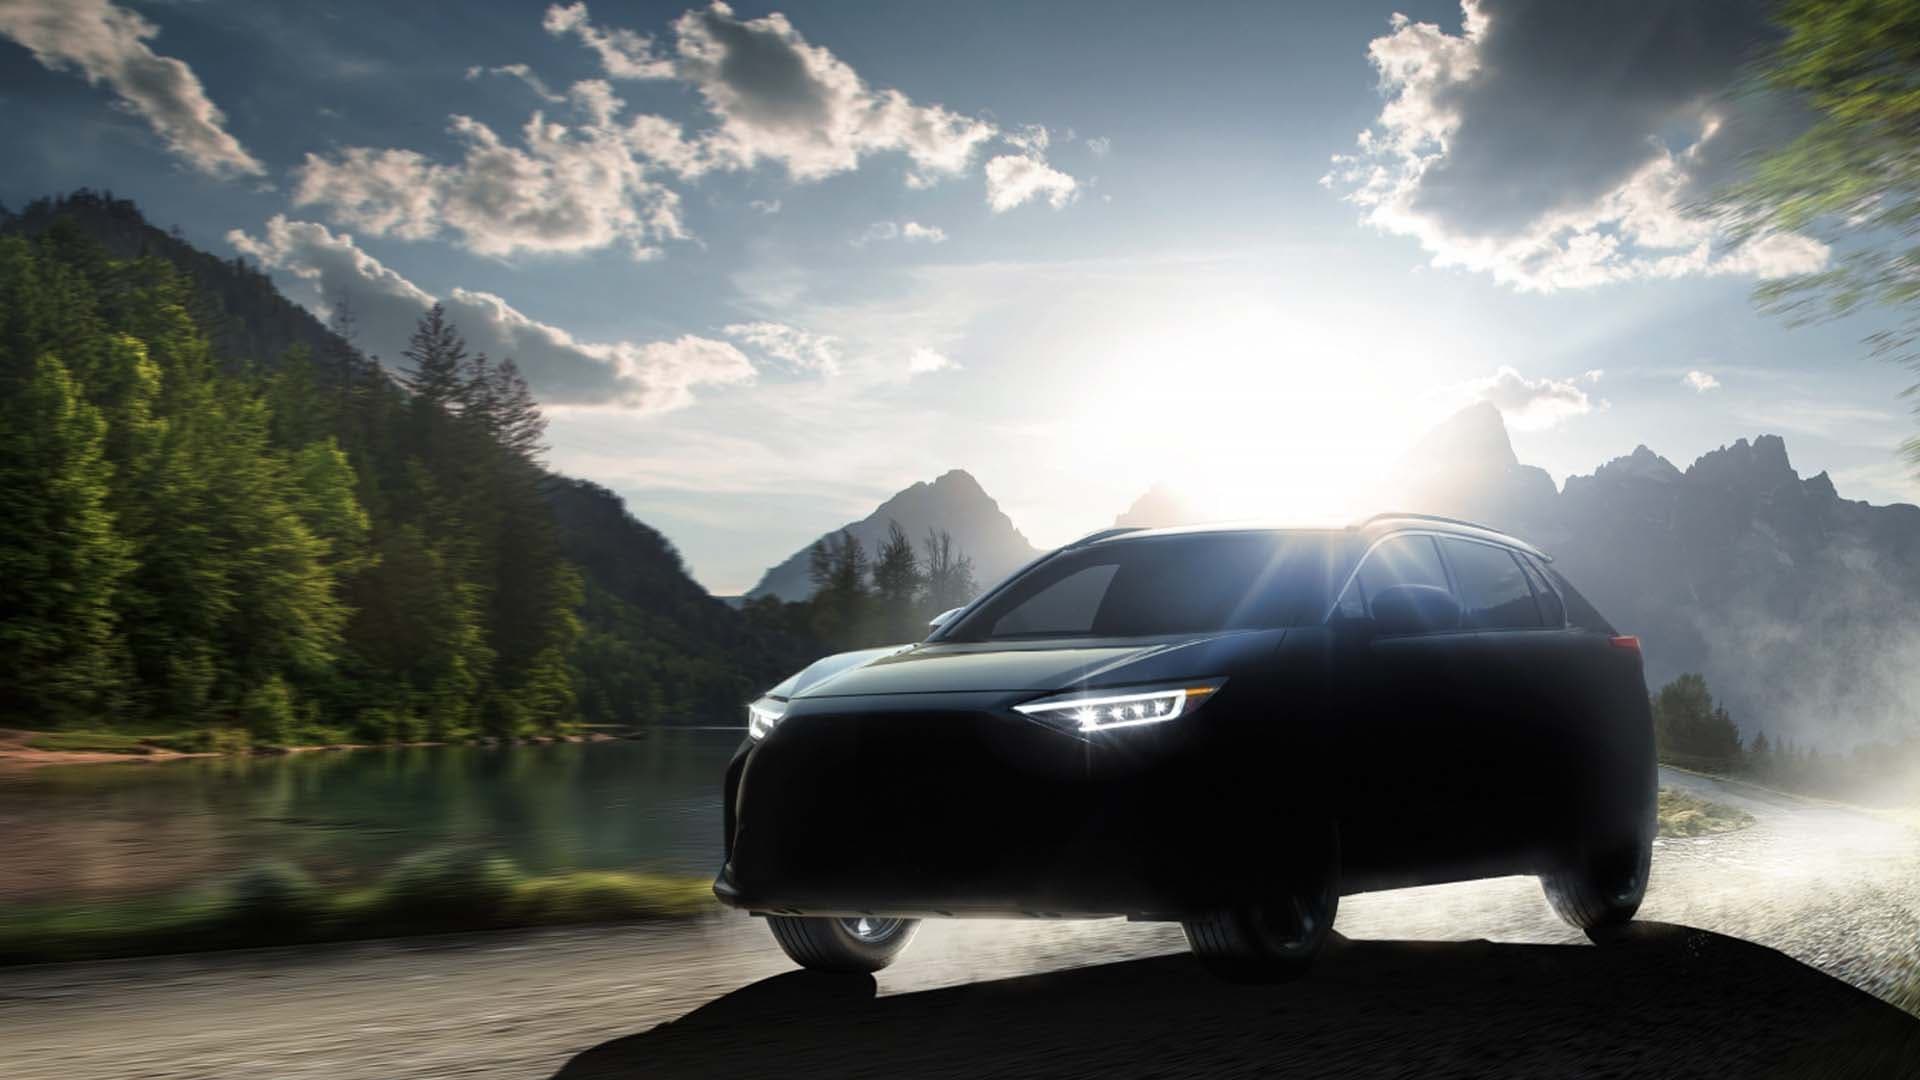 Subaru’s First Electric Car Will Be the Solterra SUV